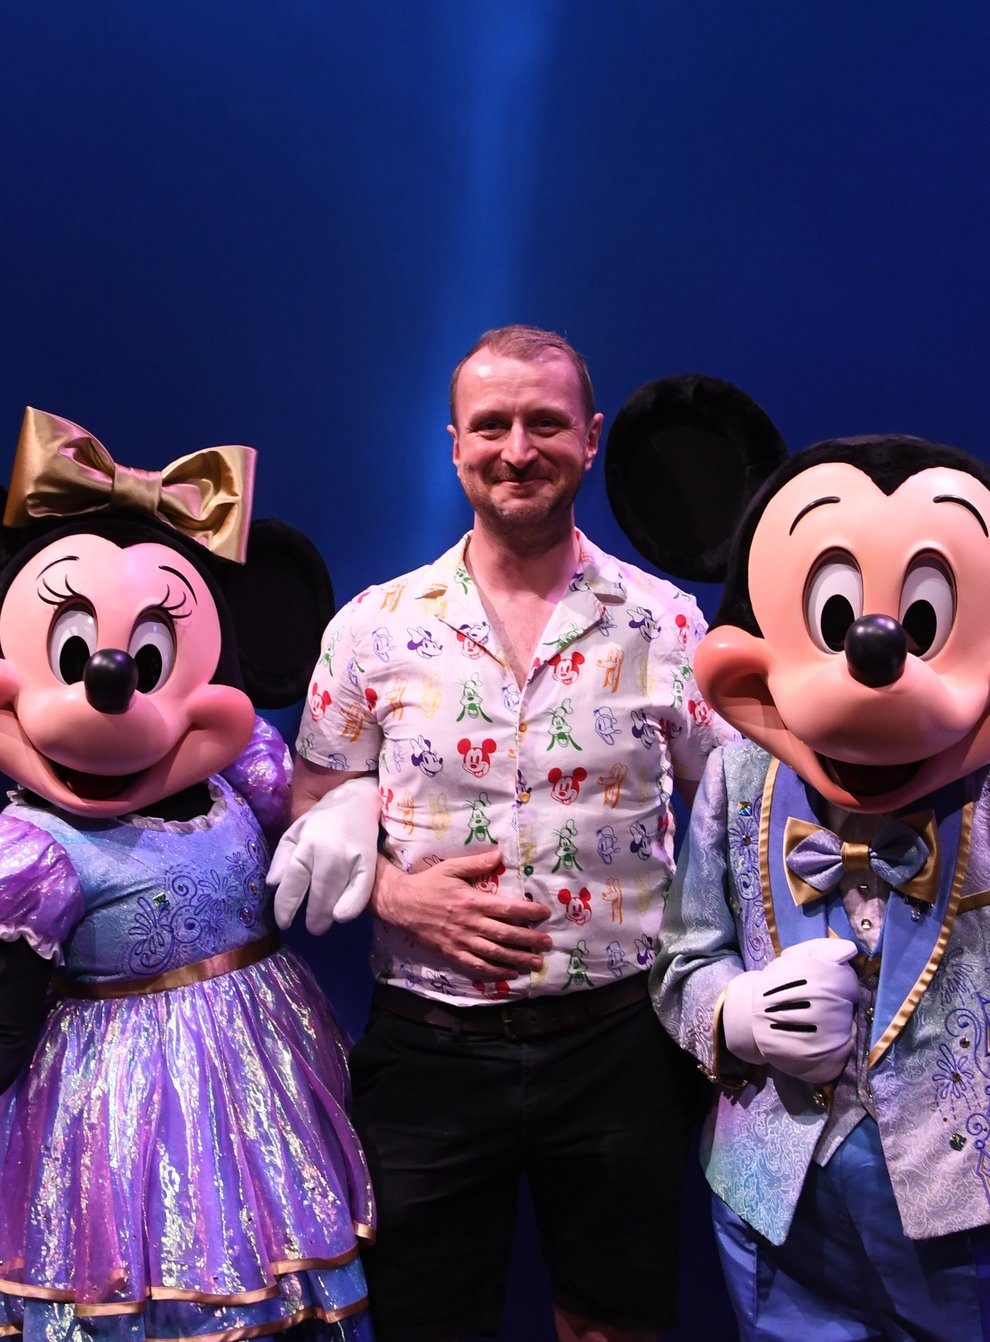 Damon Smith with Minnie Mouse and Mickey Mouse in their 50th anniversary attire (Damon Smith/PA)